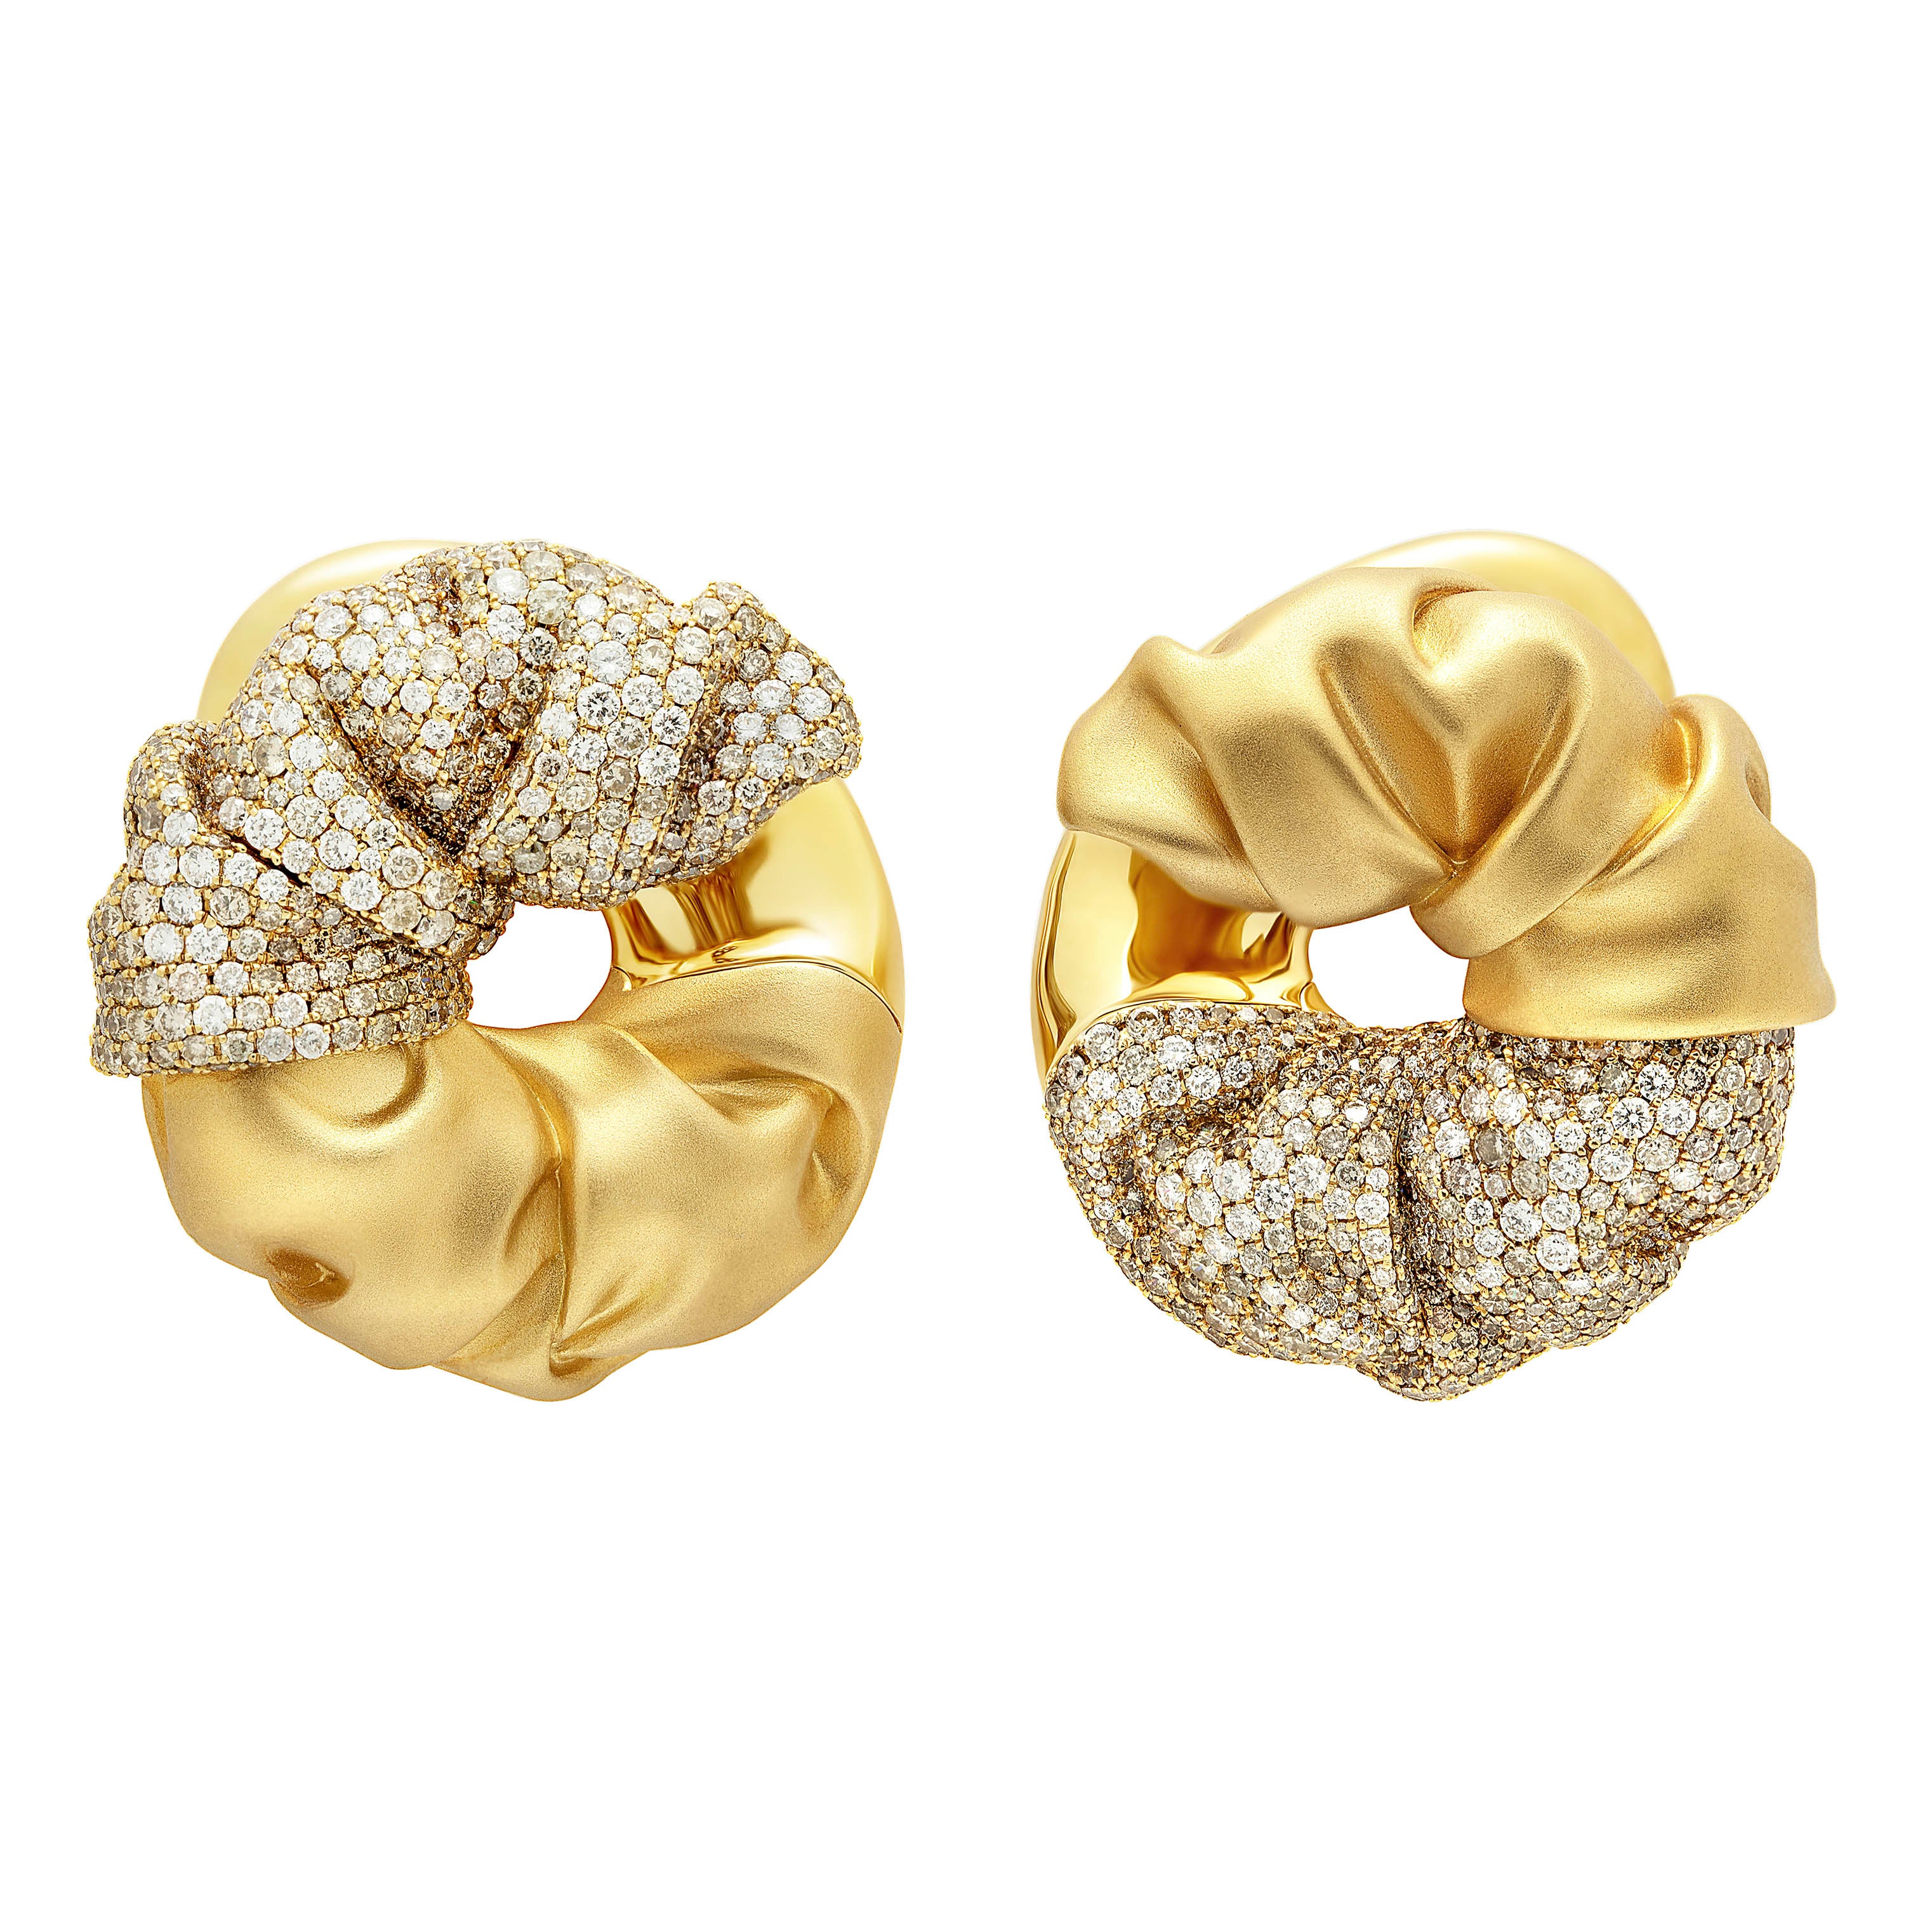 E 0132-3, 18K Yellow Gold, White and Champagne Diamonds Earrings